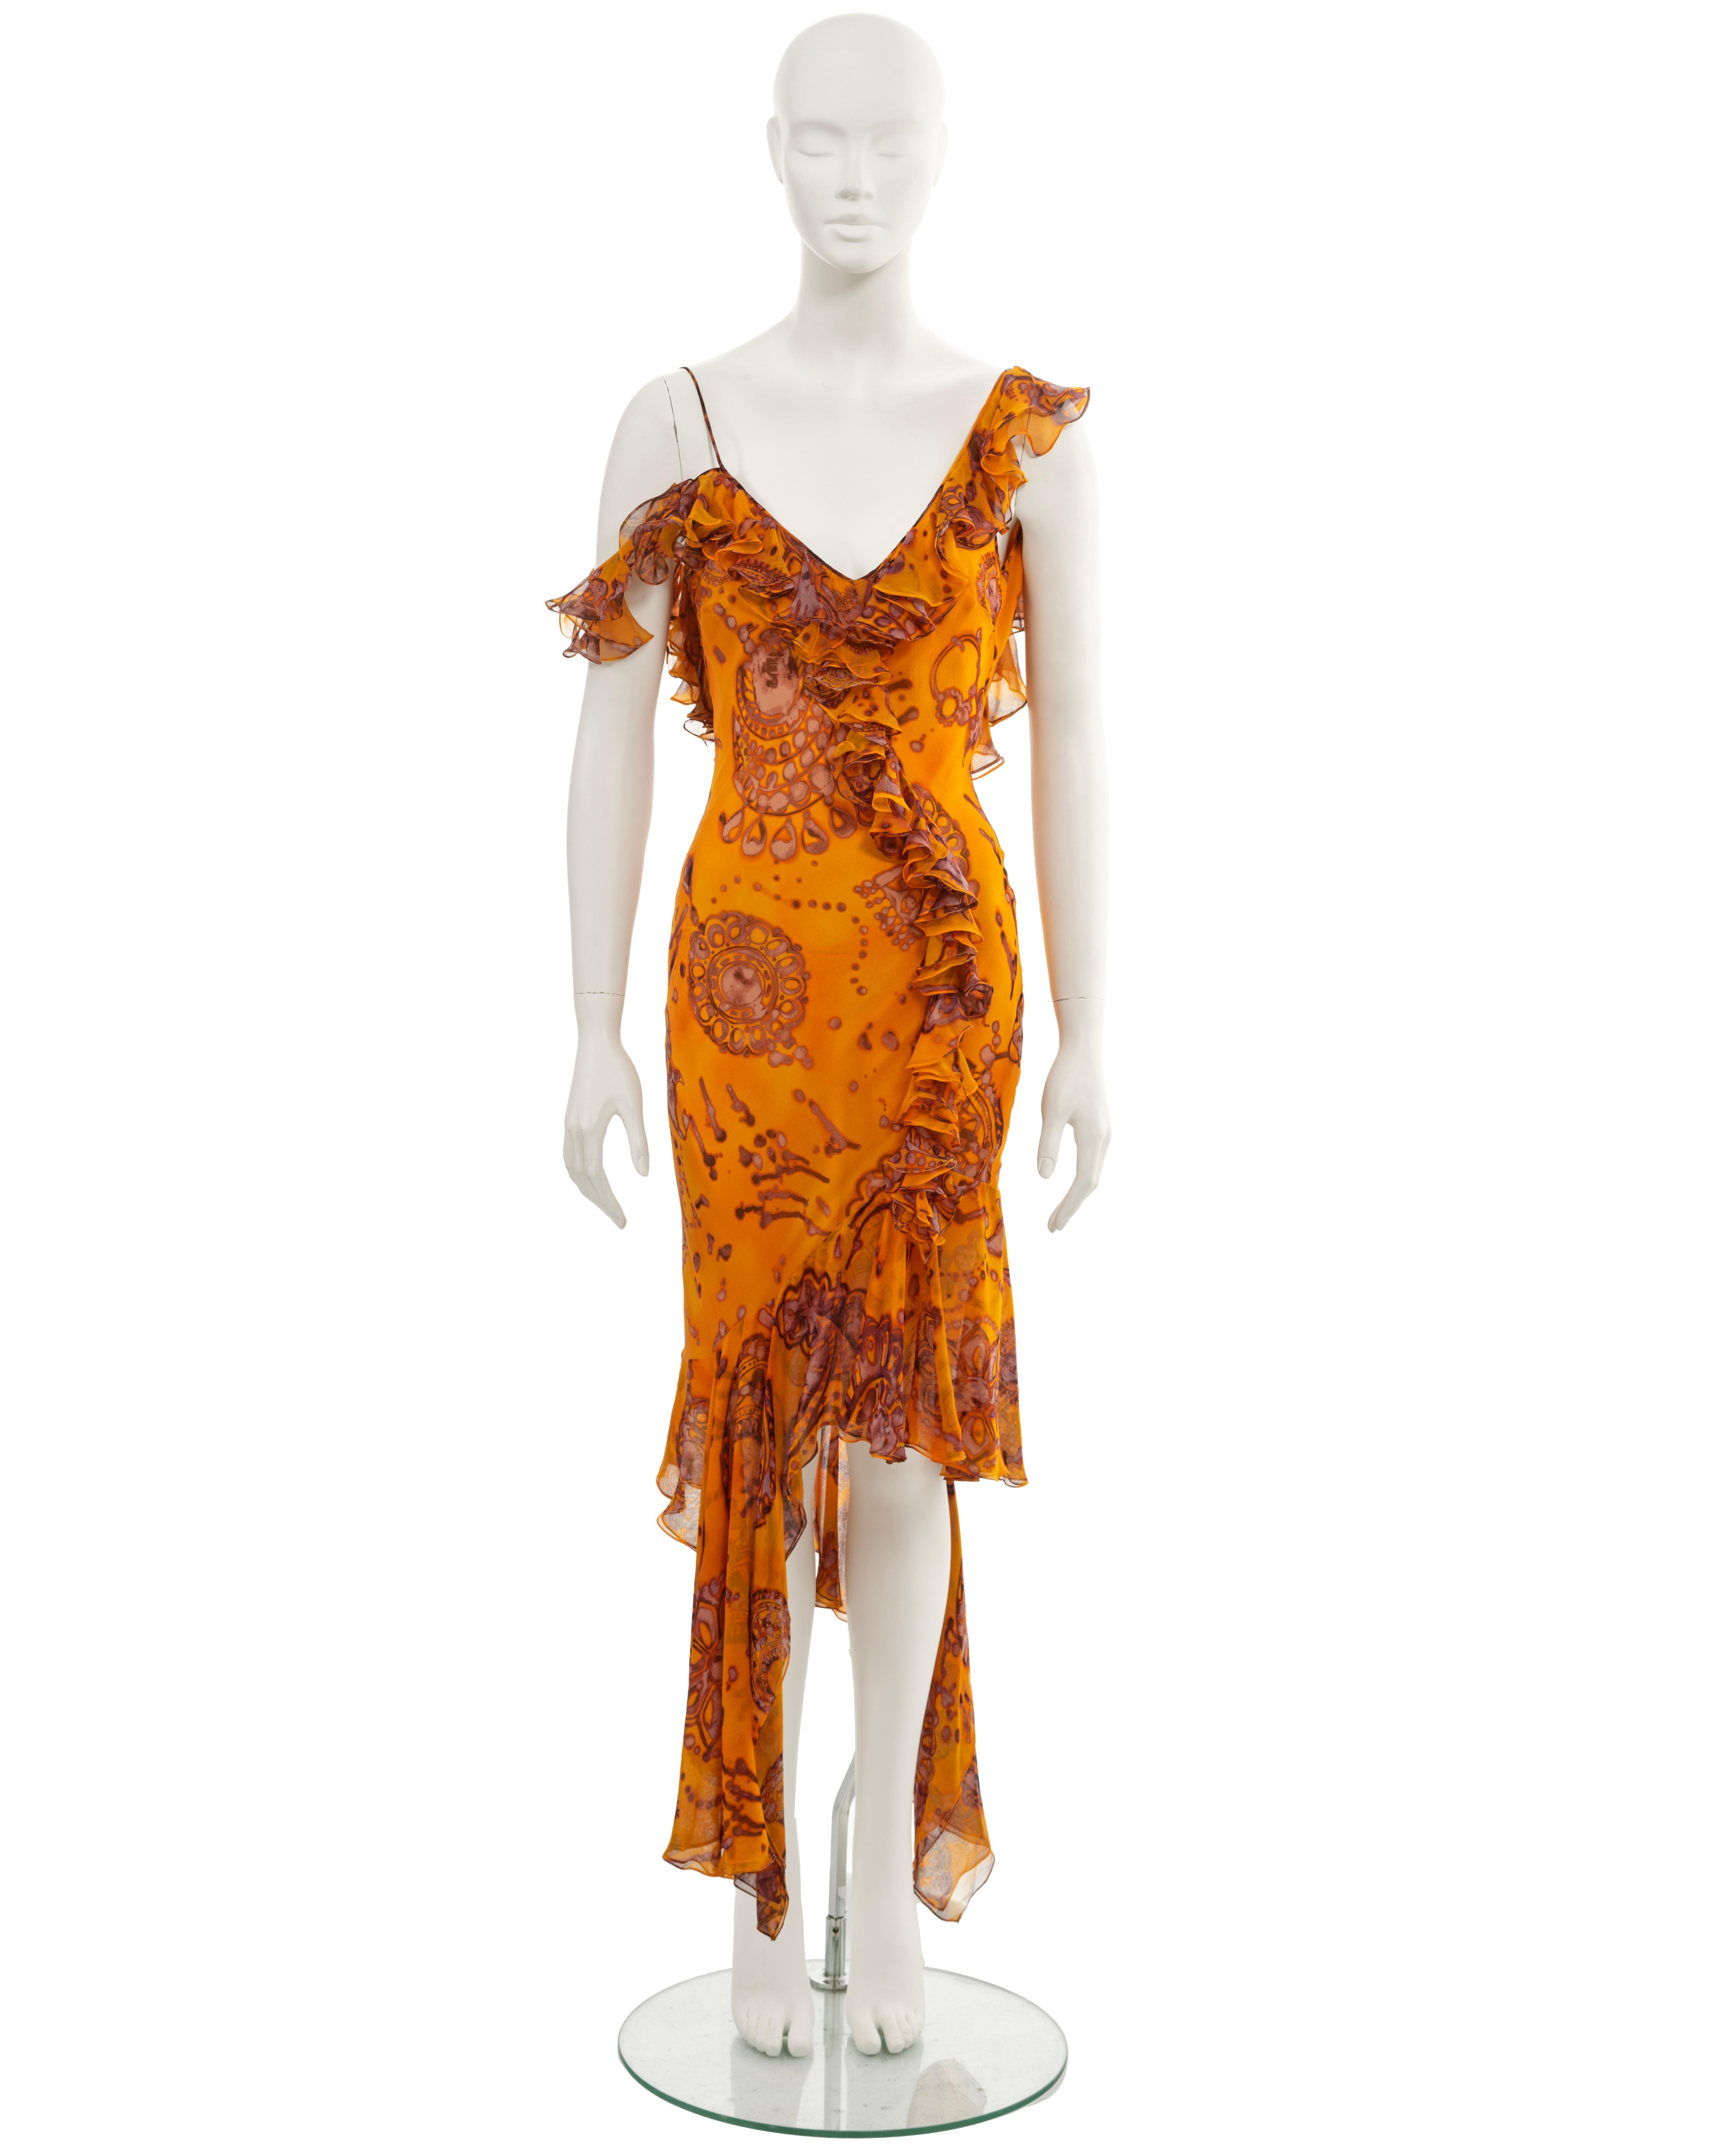 ▪ John Galliano evening dress
▪ Spring-Summer 2003
▪ Sold by One of a Kind Archive
▪ Crafted from silk chiffon in a vibrant saffron hue, featuring a batik-dyed outsized paisley print
▪ The neckline, shoulder straps, and bodice are adorned with a